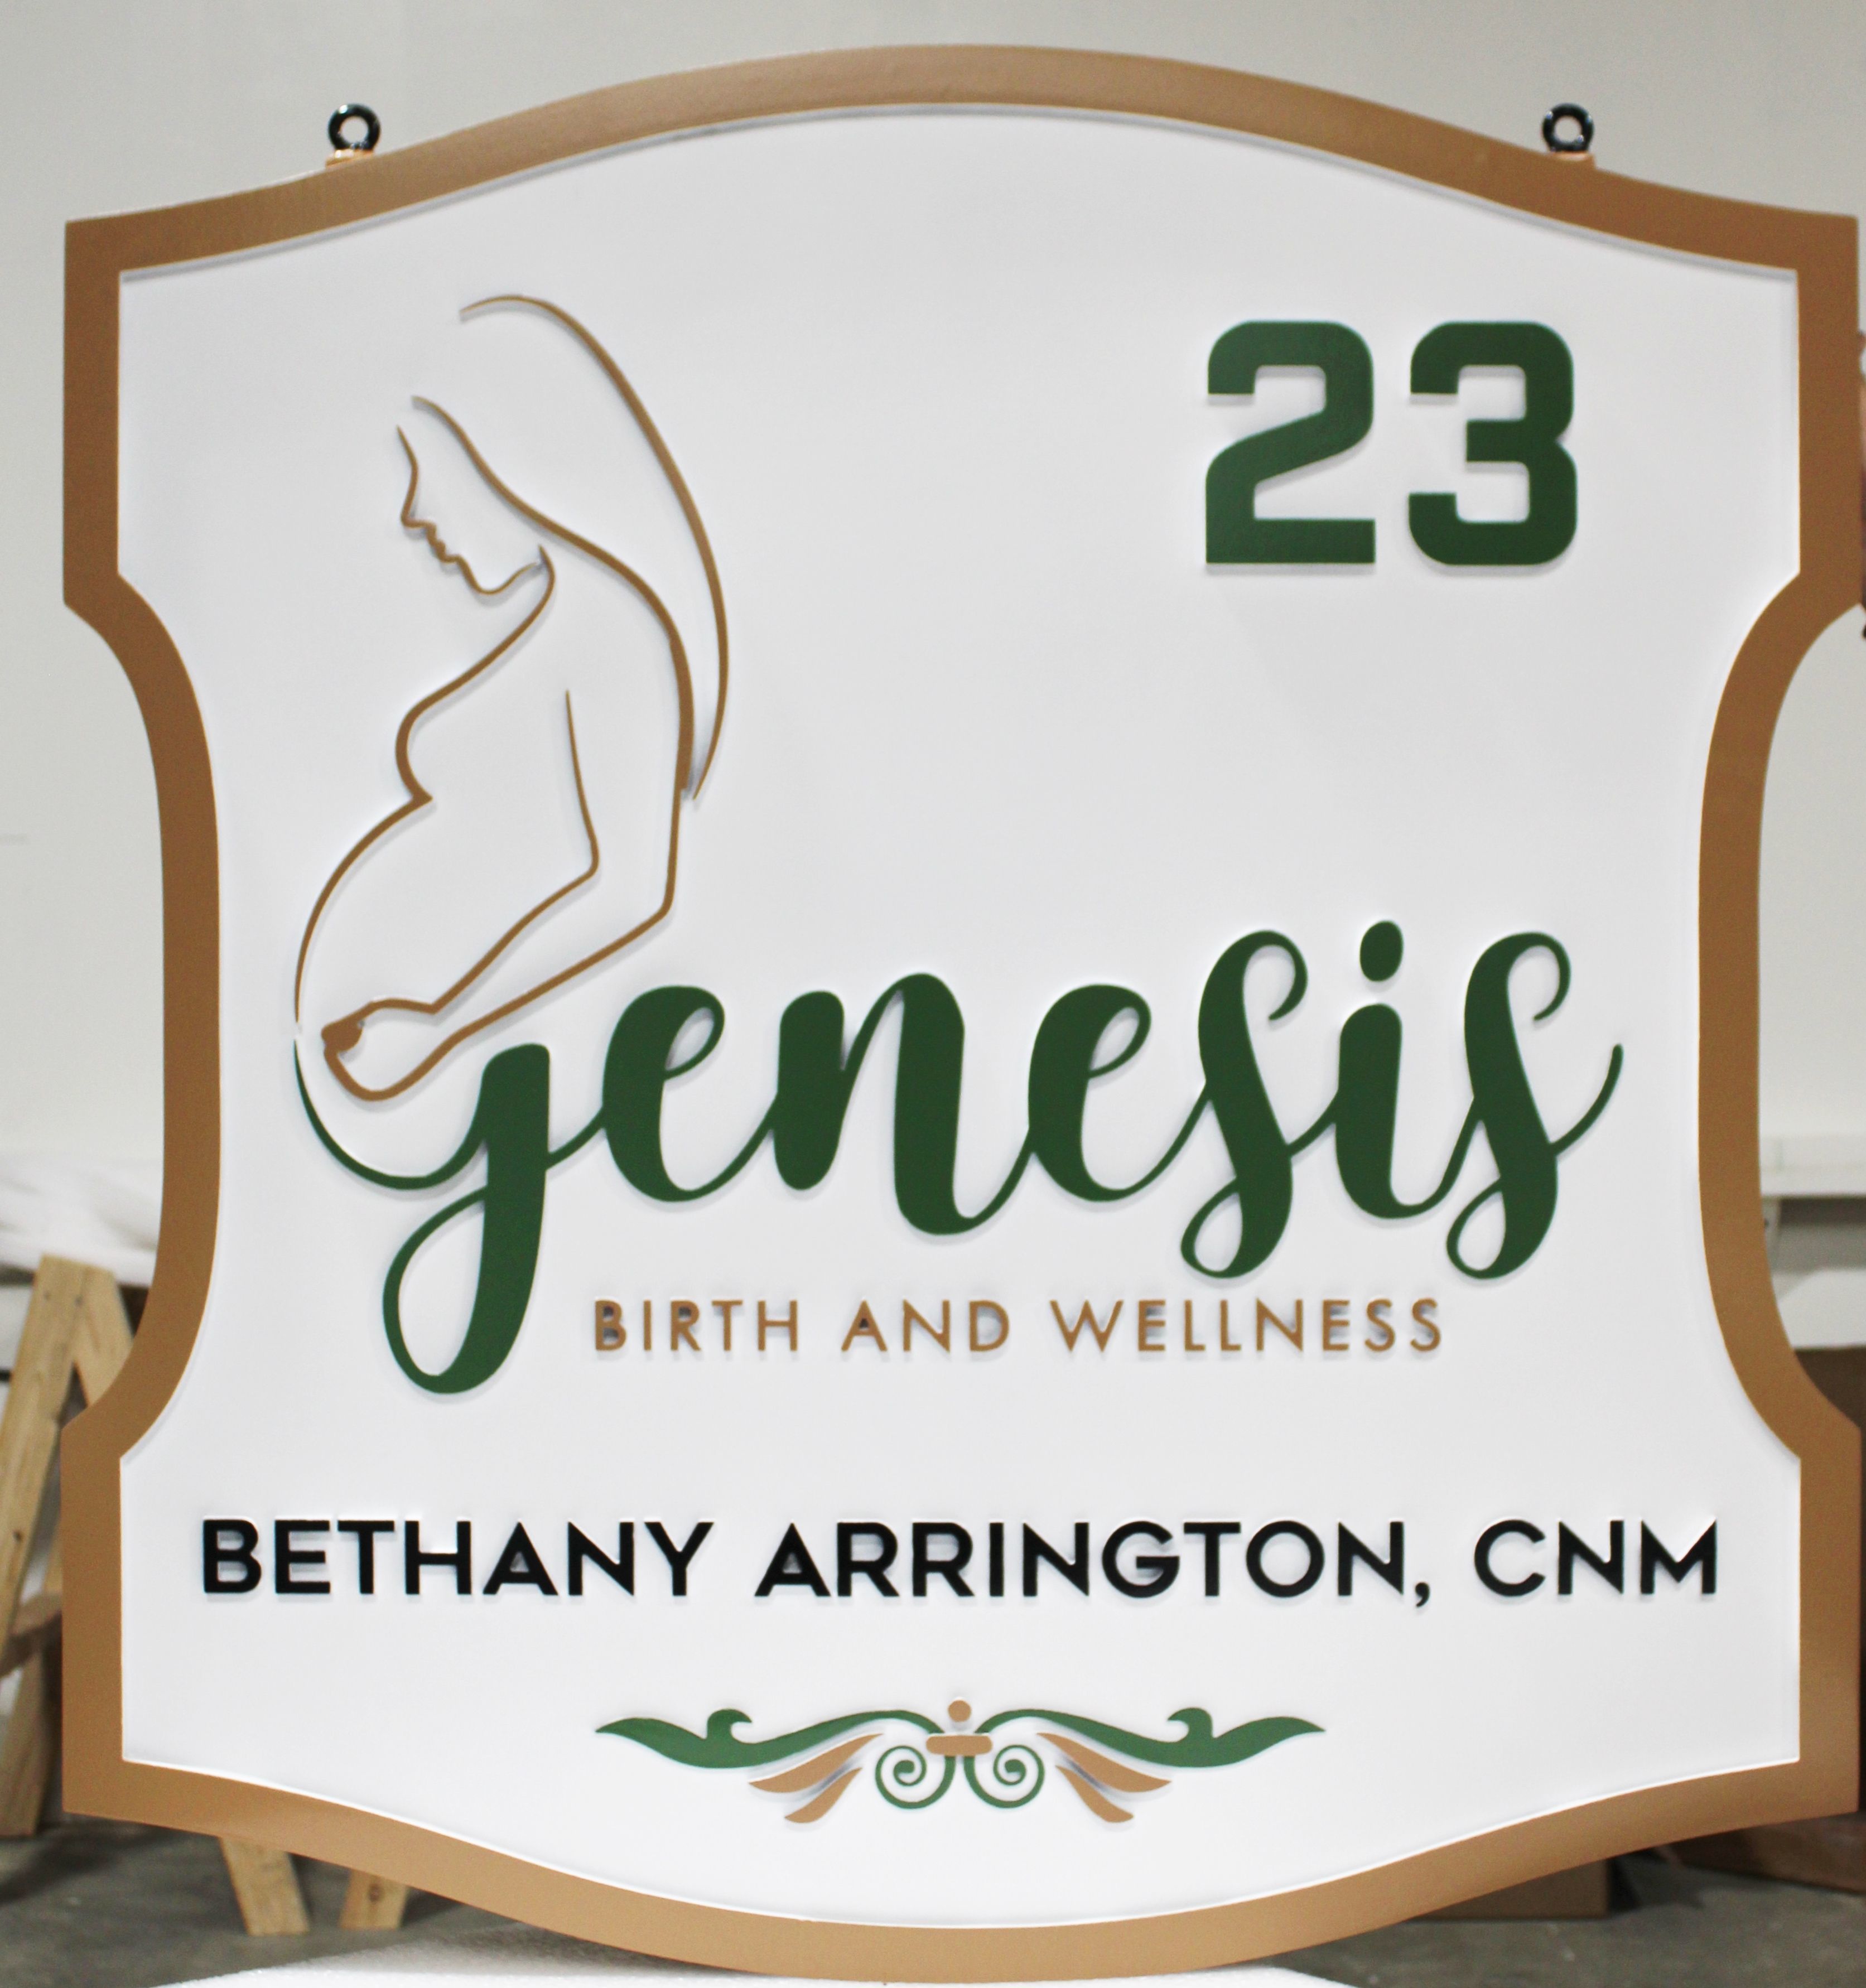 B11083 - Carved  2.5-D Raised Relief HDU Sign  for the Genesis Birth and Wellness  Clinic 